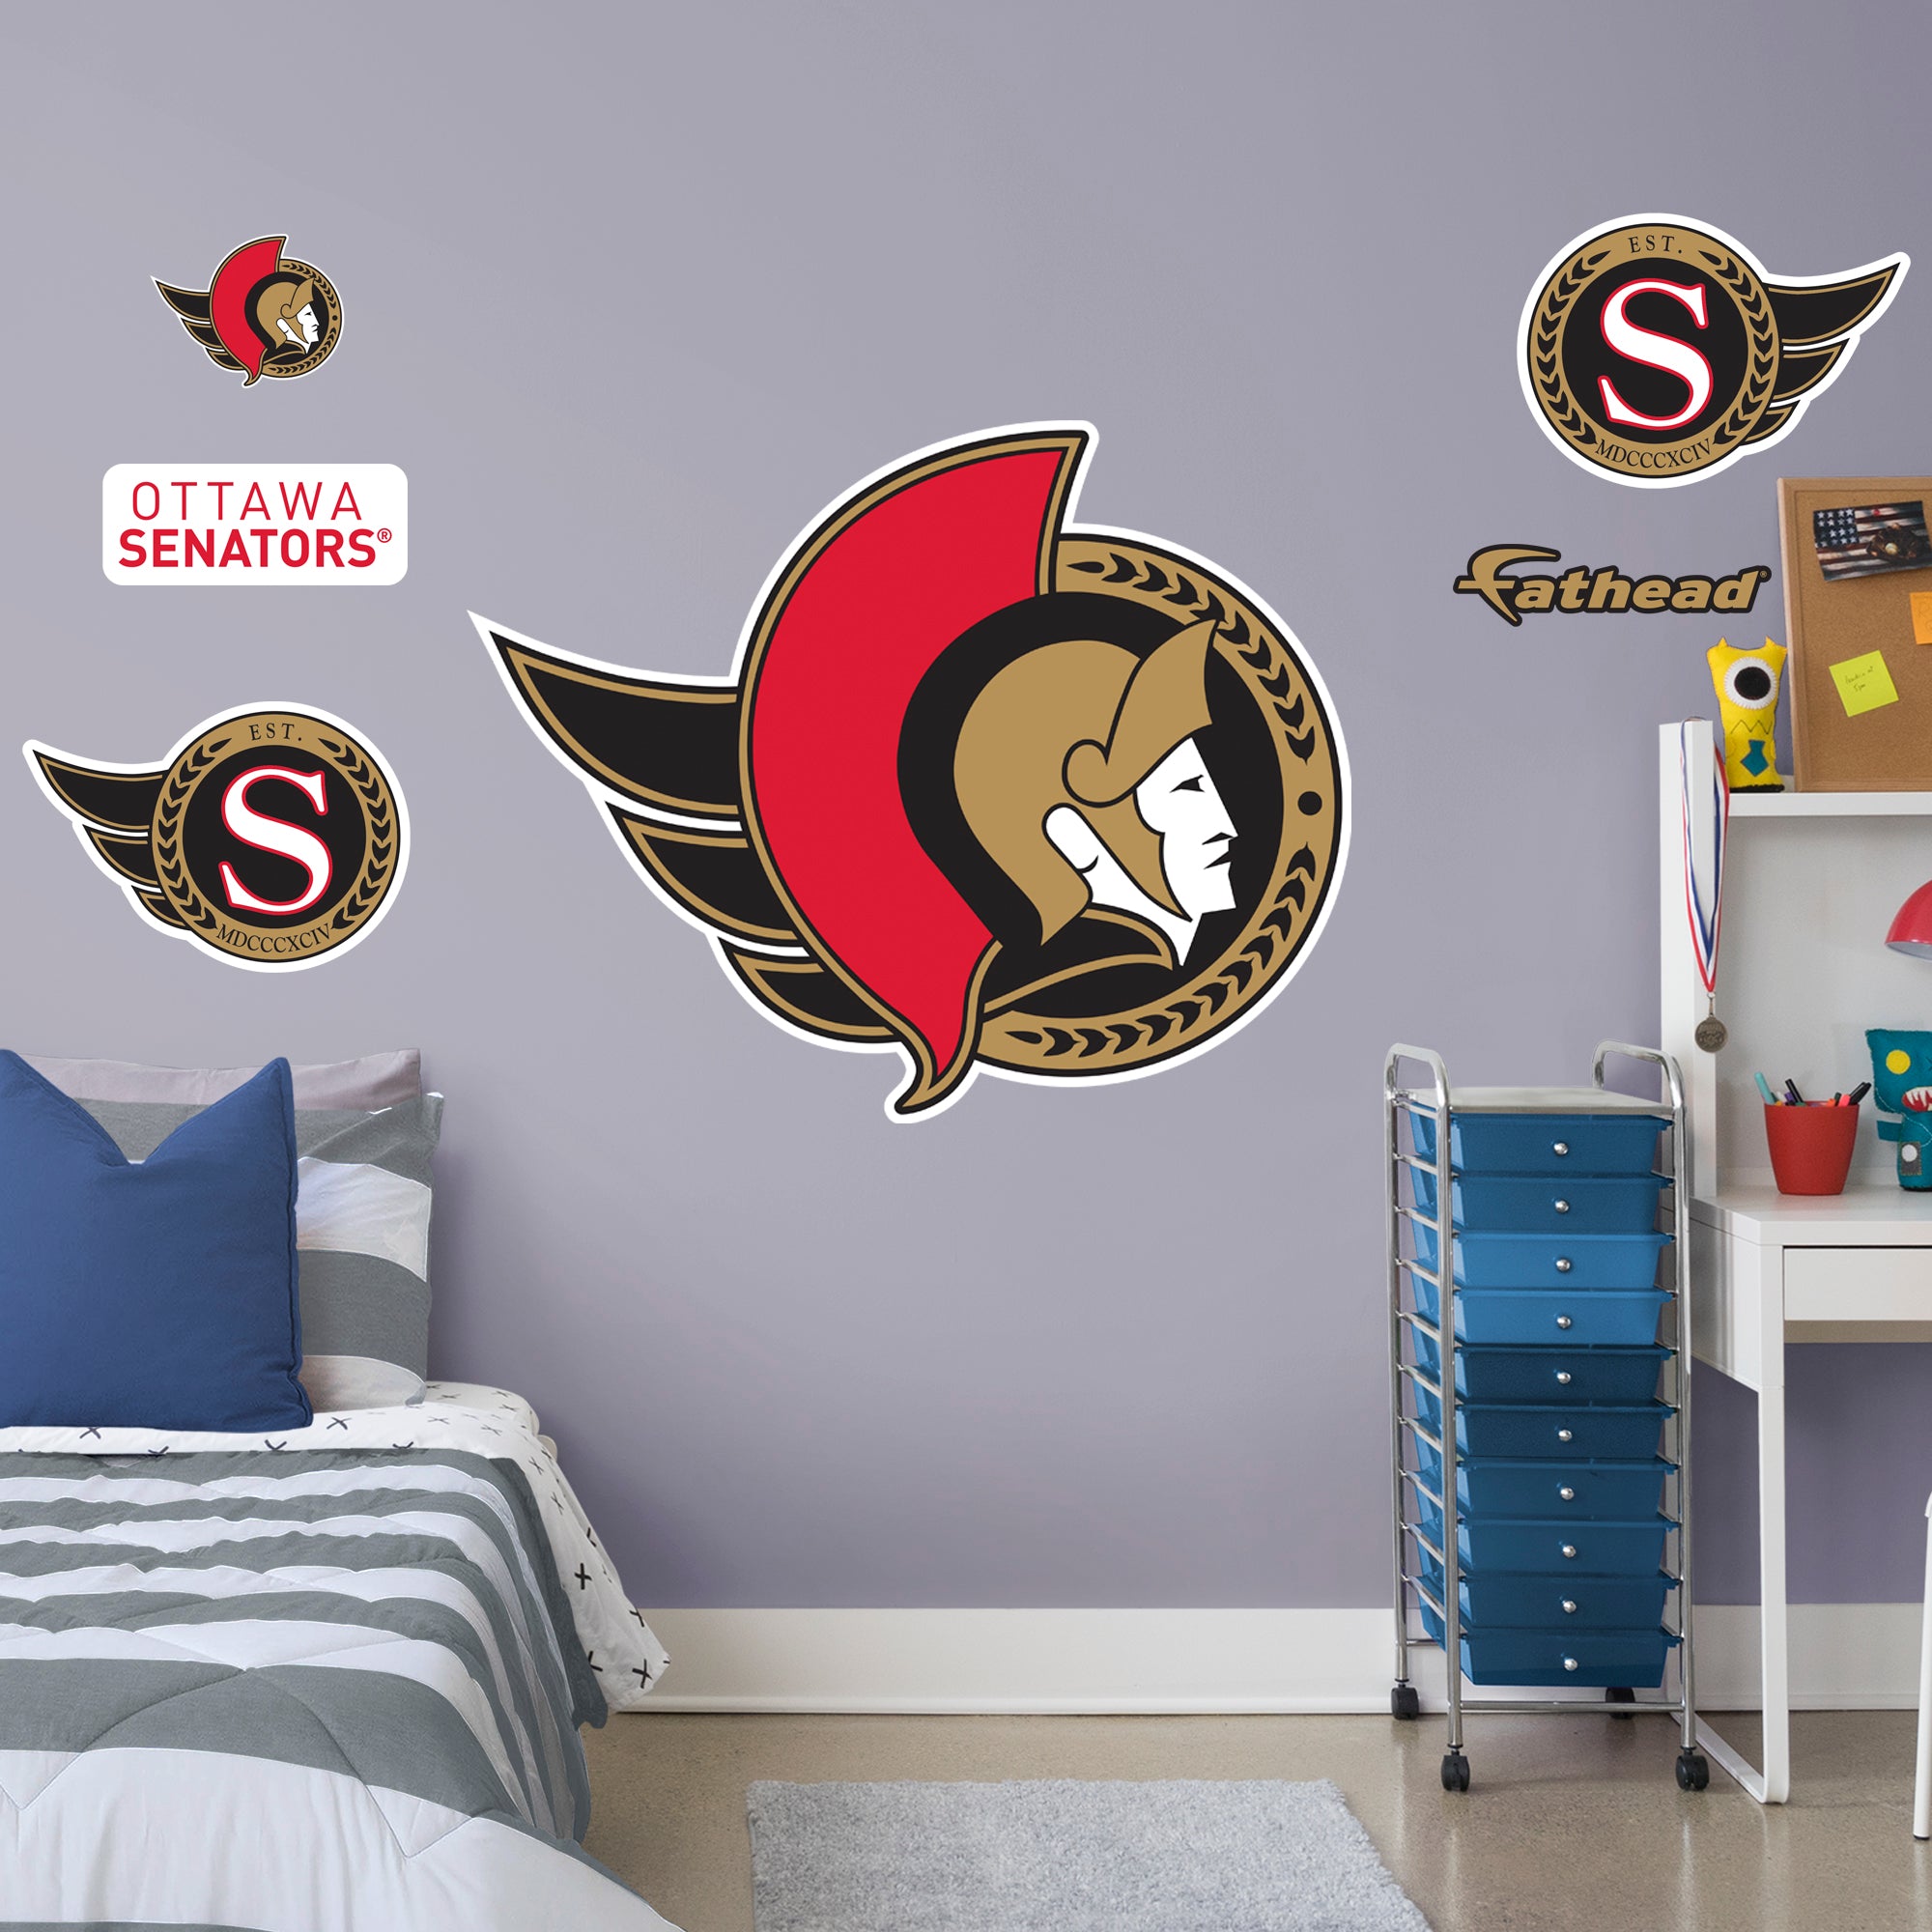 Ottawa Senators 2020 RealBig Logo - Officially Licensed NHL Removable Wall Decal Giant Logo + 5 Decals (38.5"W x 48.5"H) by Fath